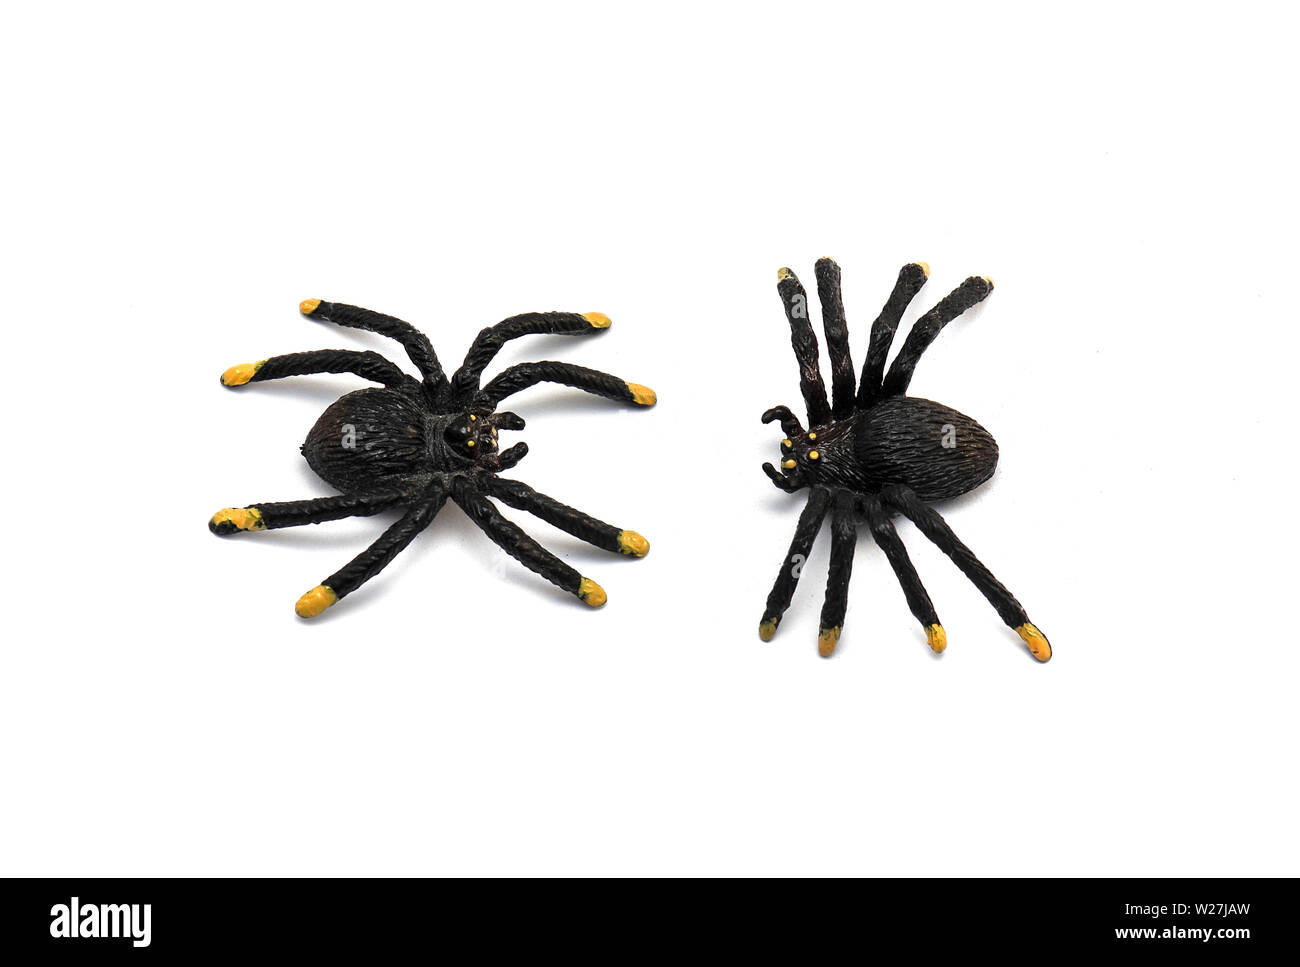 Two plastic Spider Toys isolated on white Background Stock Photo